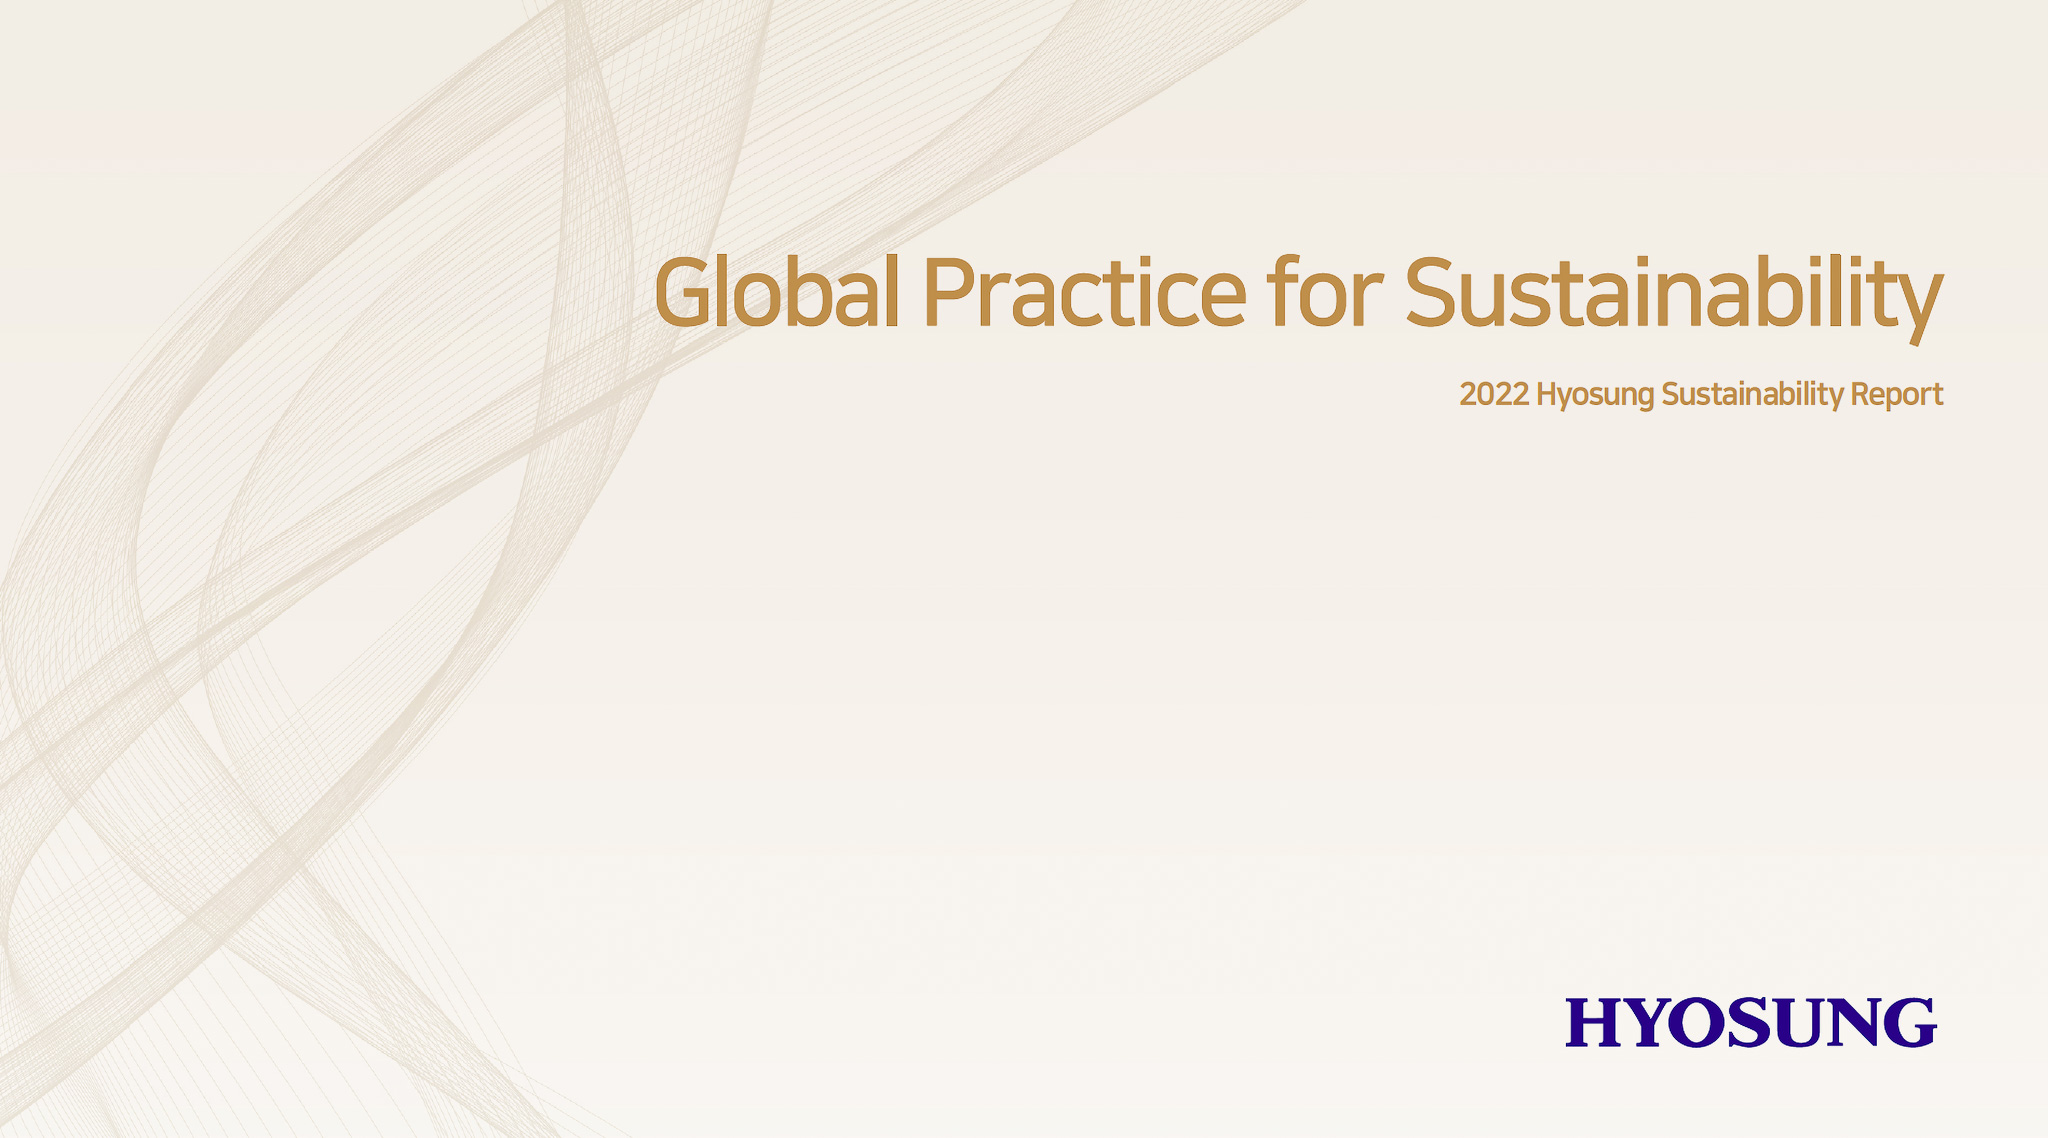 Sustainability Report Review Part 1